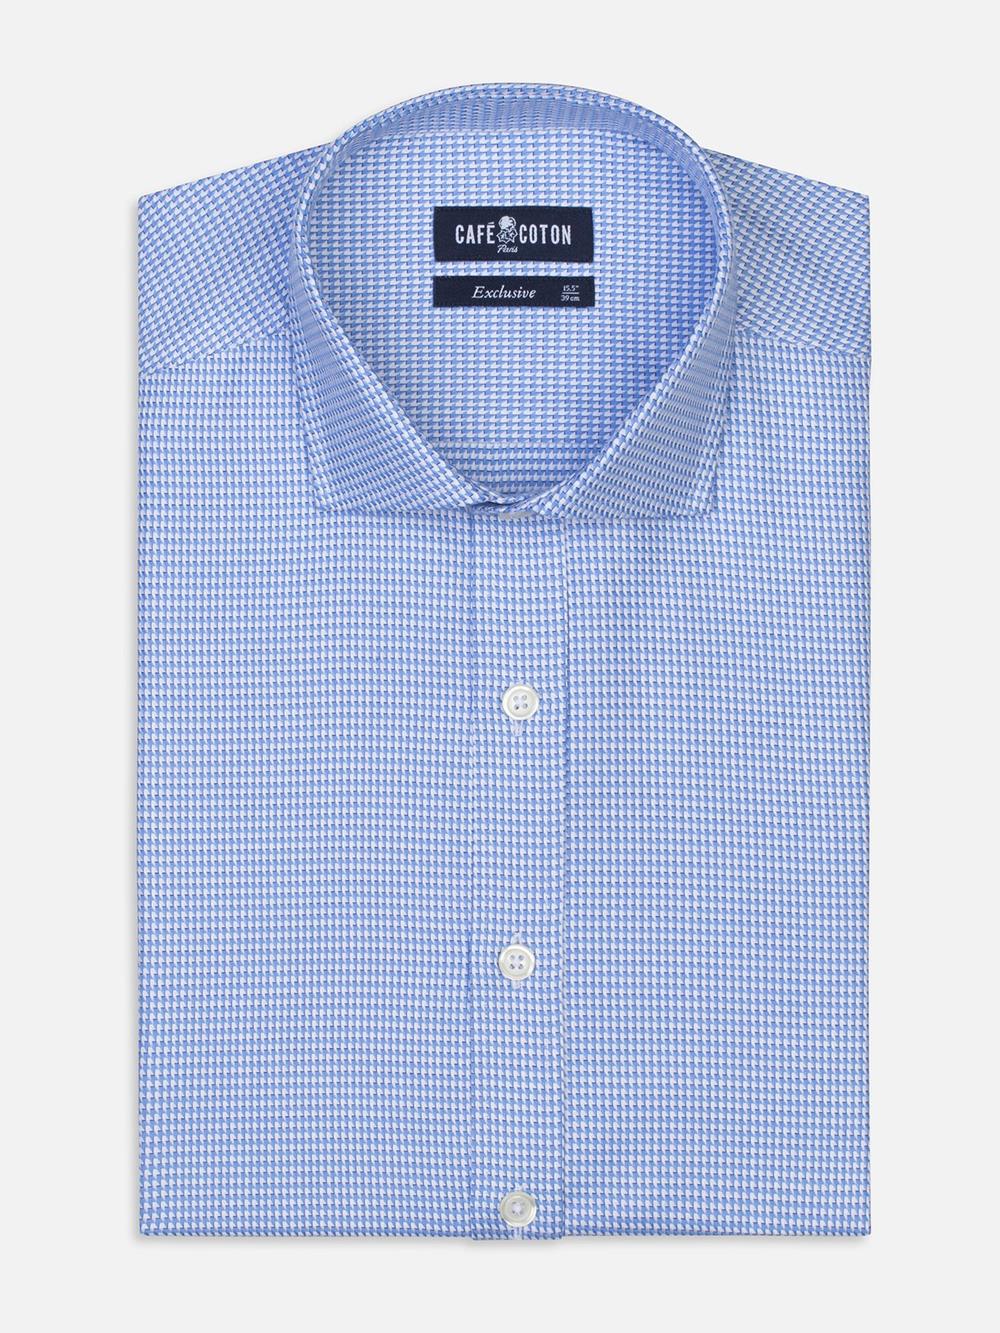 Blue sky and white printed houndstooth twill slim extra long fit shirt